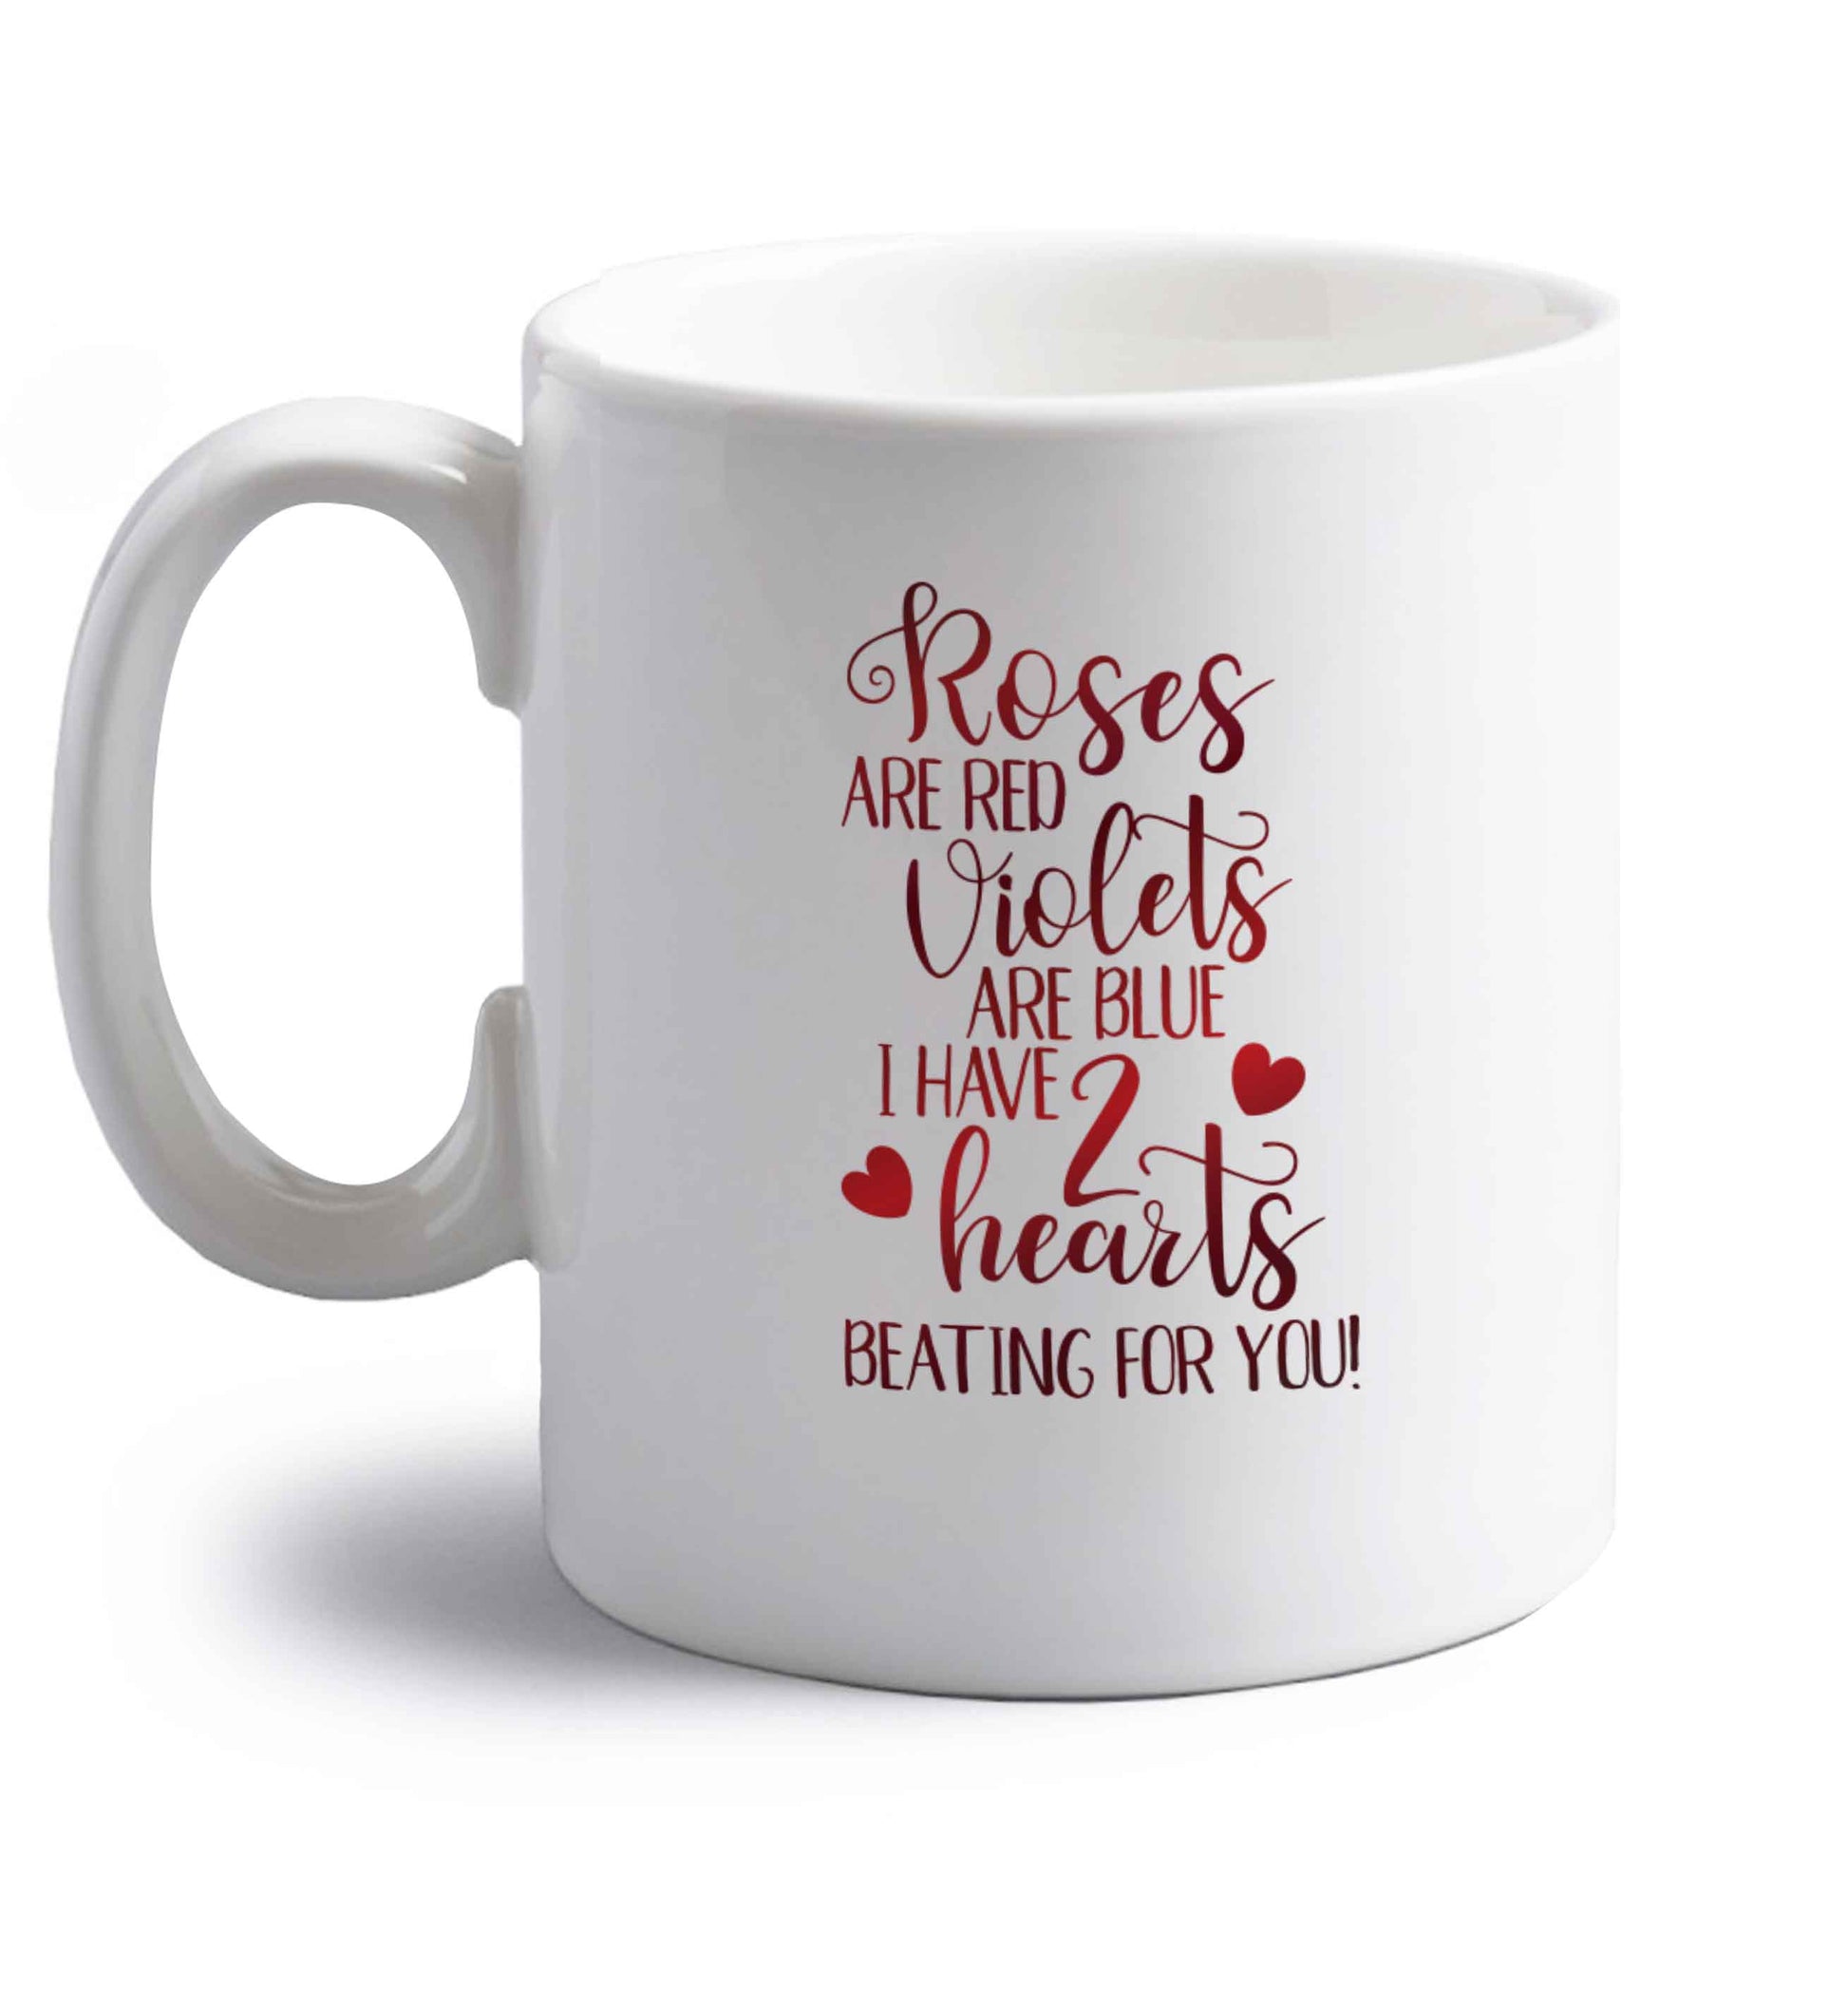 Roses are red violets are blue I have two hearts beating for you right handed white ceramic mug 